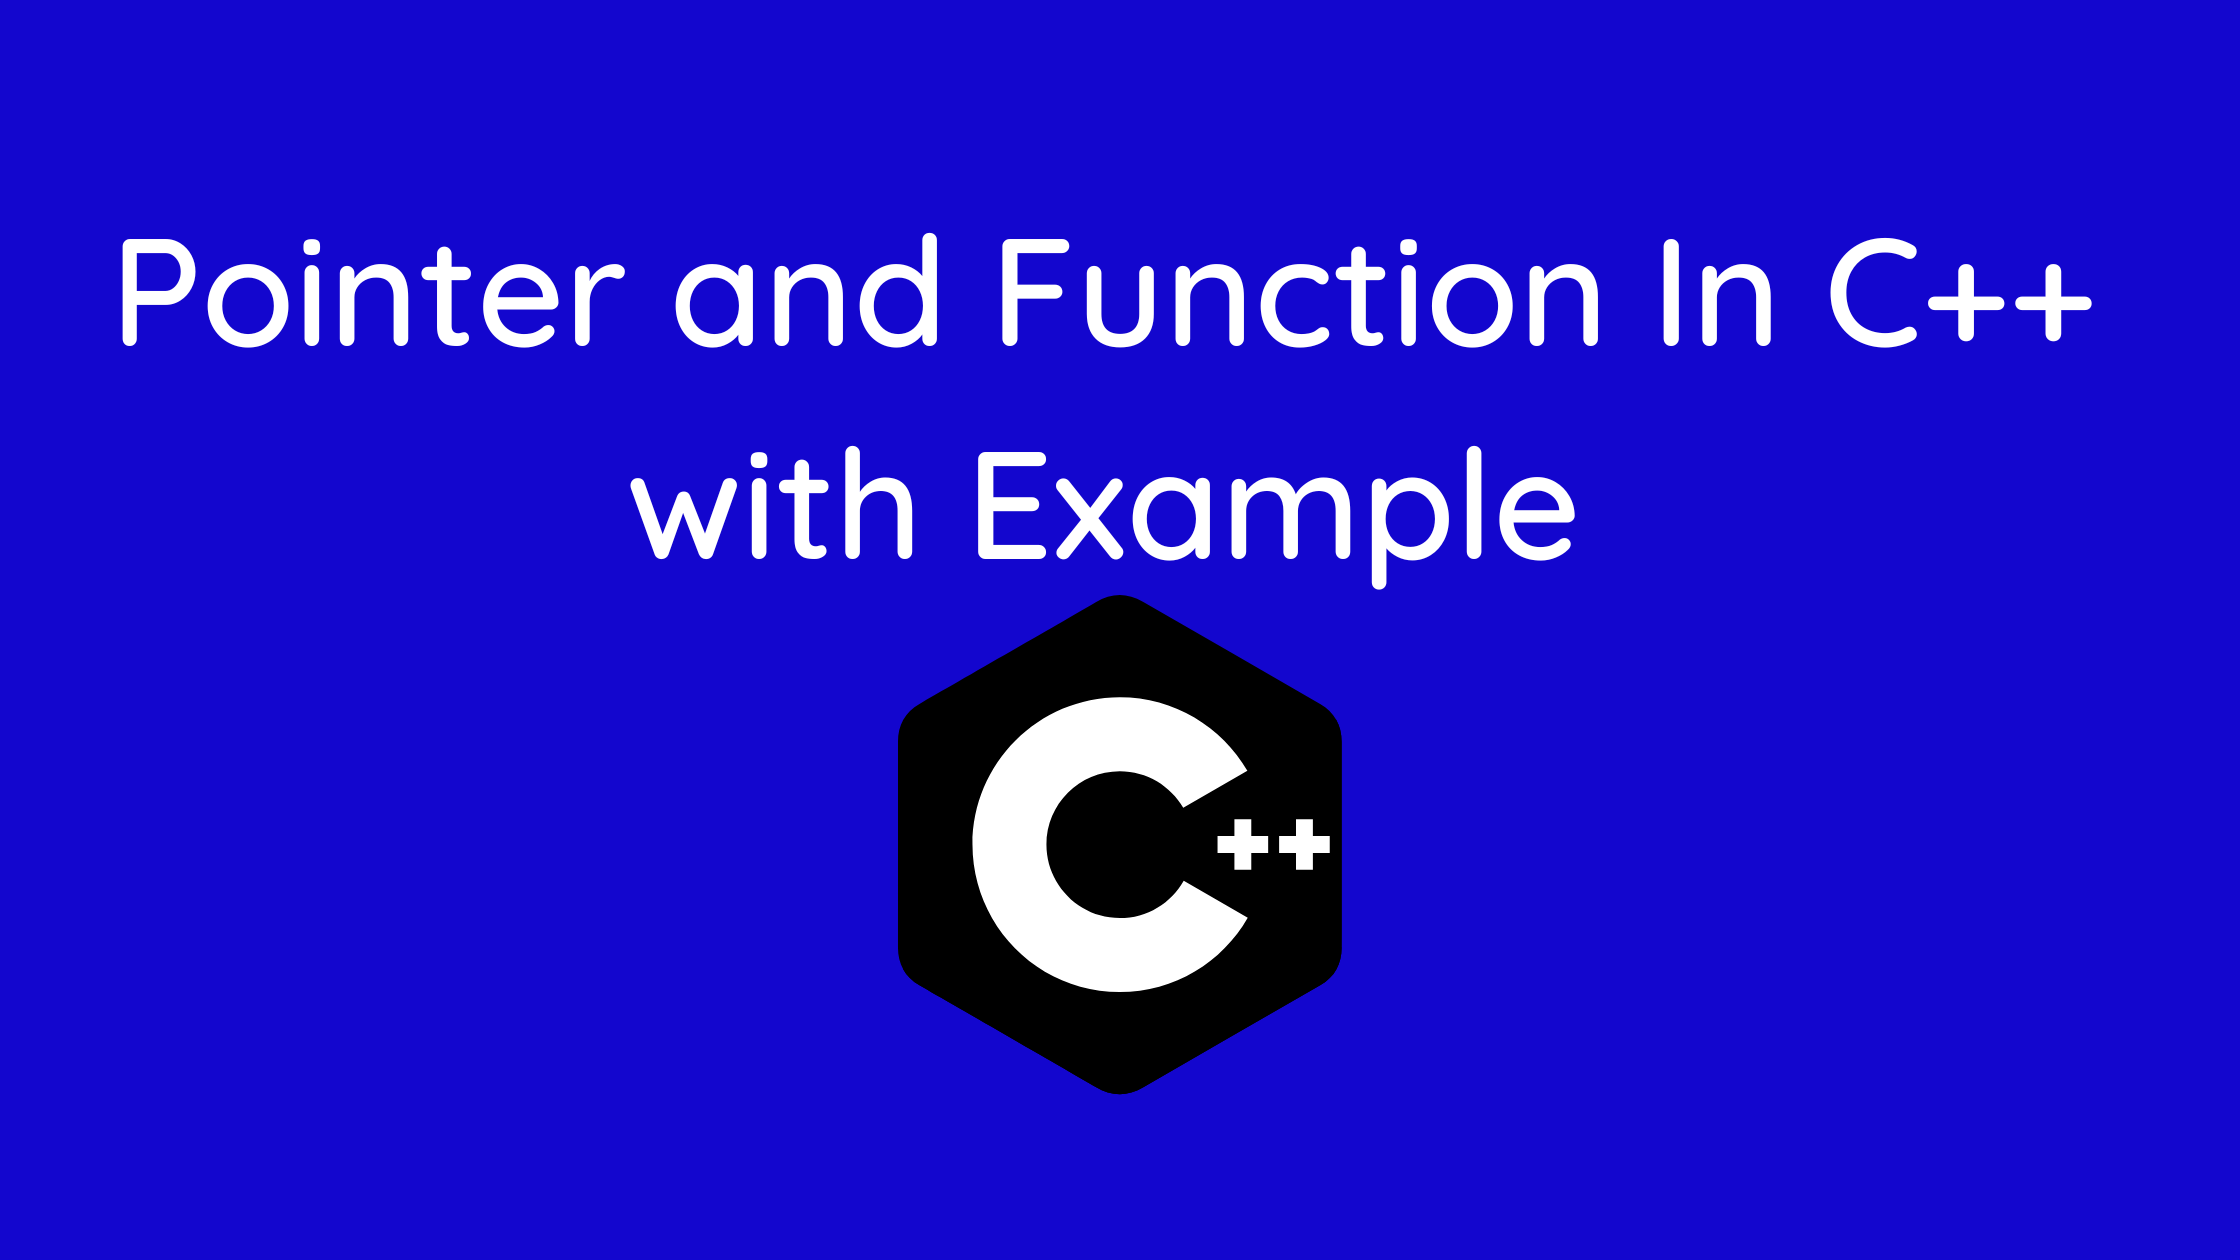 Pointer and Function In C++